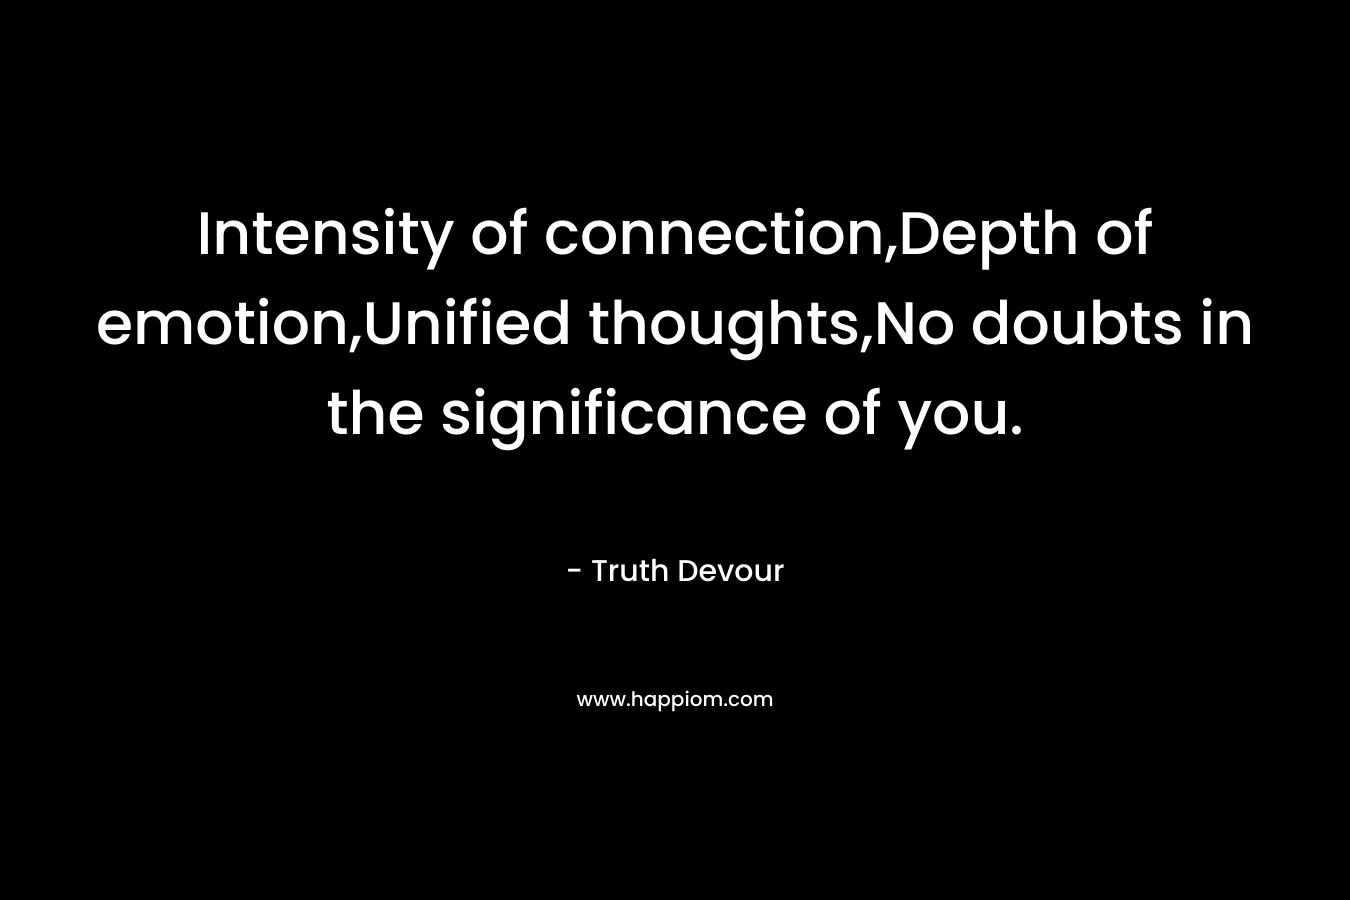 Intensity of connection,Depth of emotion,Unified thoughts,No doubts in the significance of you.